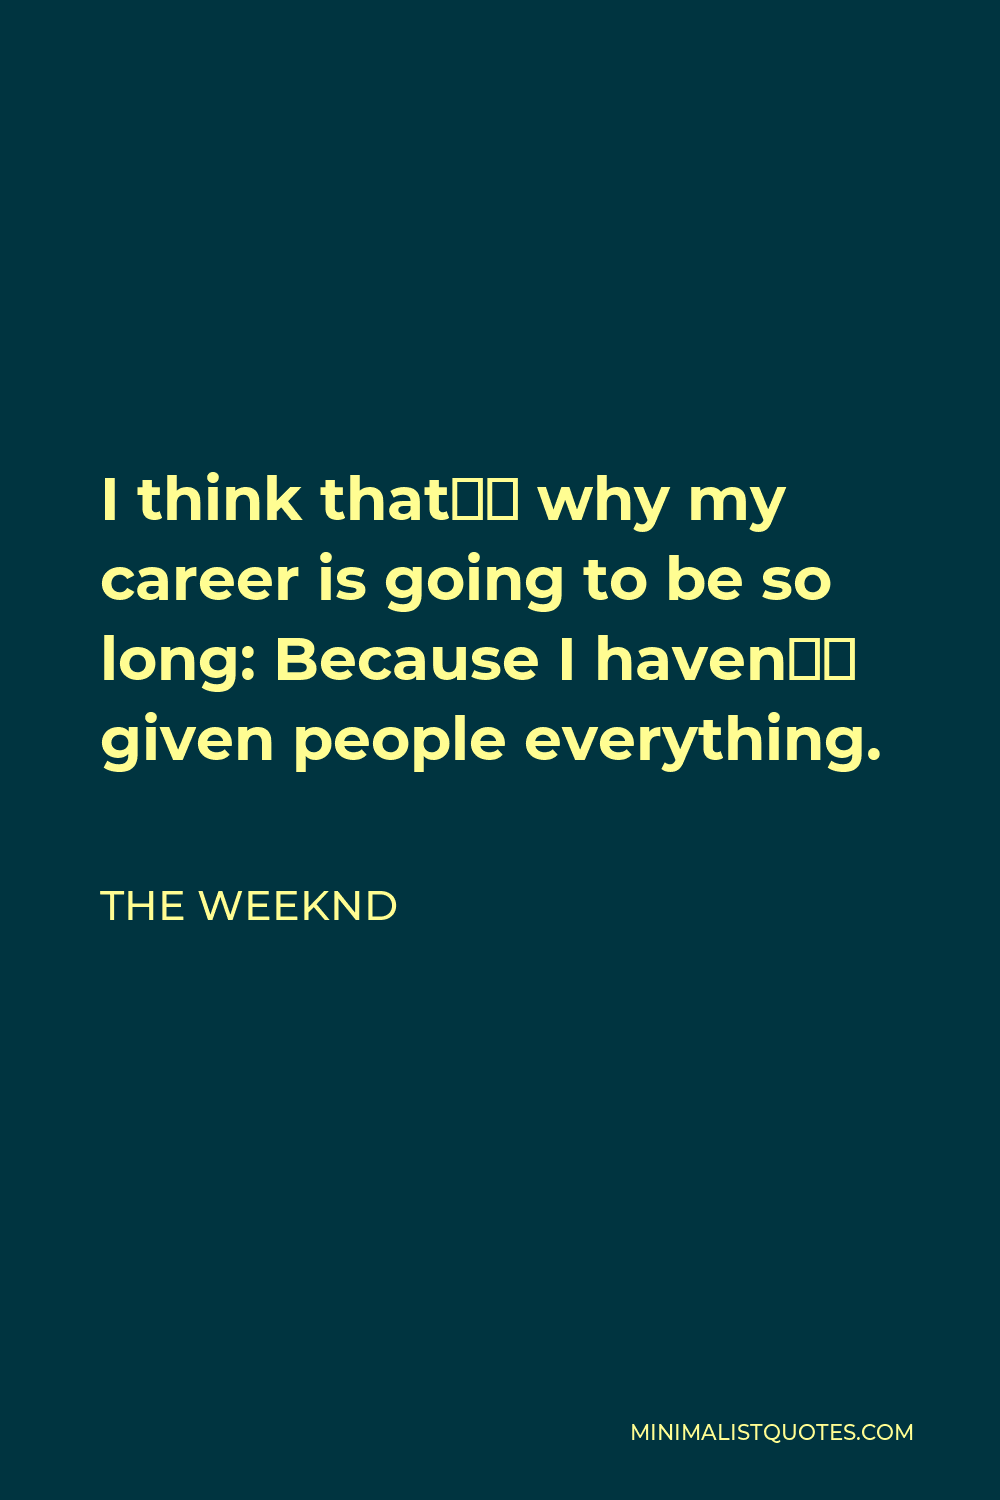 The Weeknd Quote - I think that’s why my career is going to be so long: Because I haven’t given people everything.